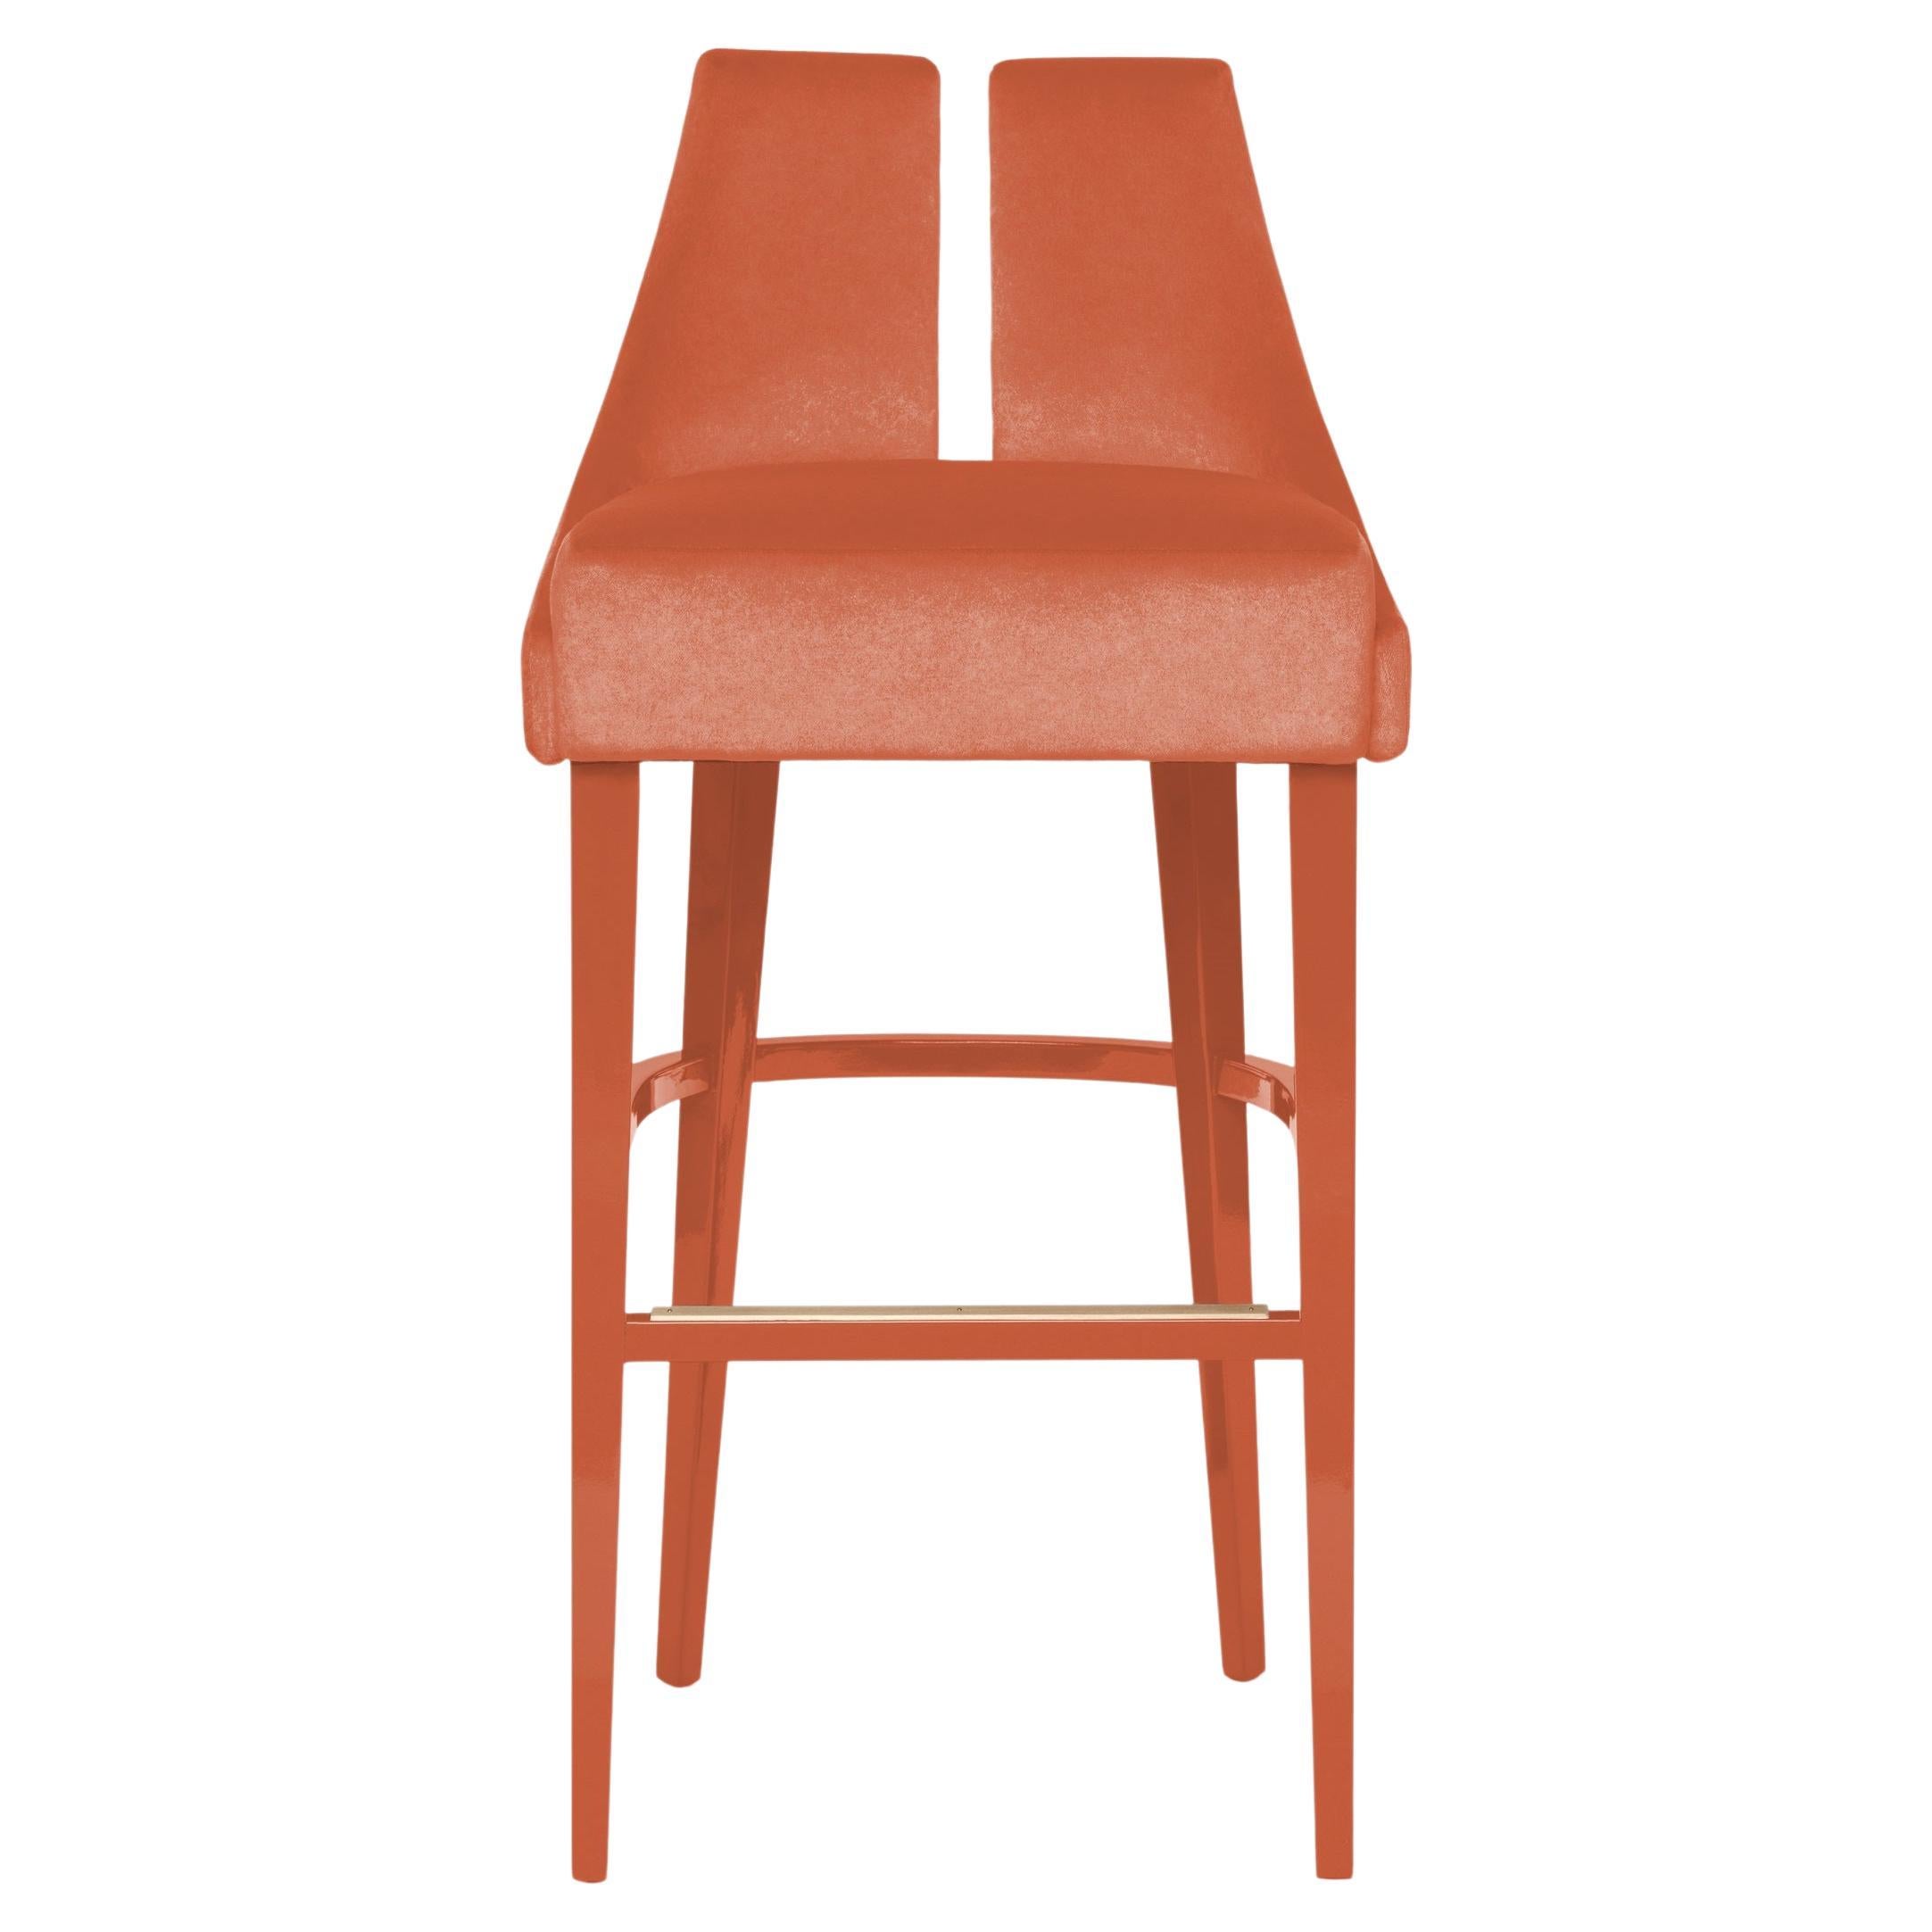 Contemporary Barstool w/ Seaming Details For Sale